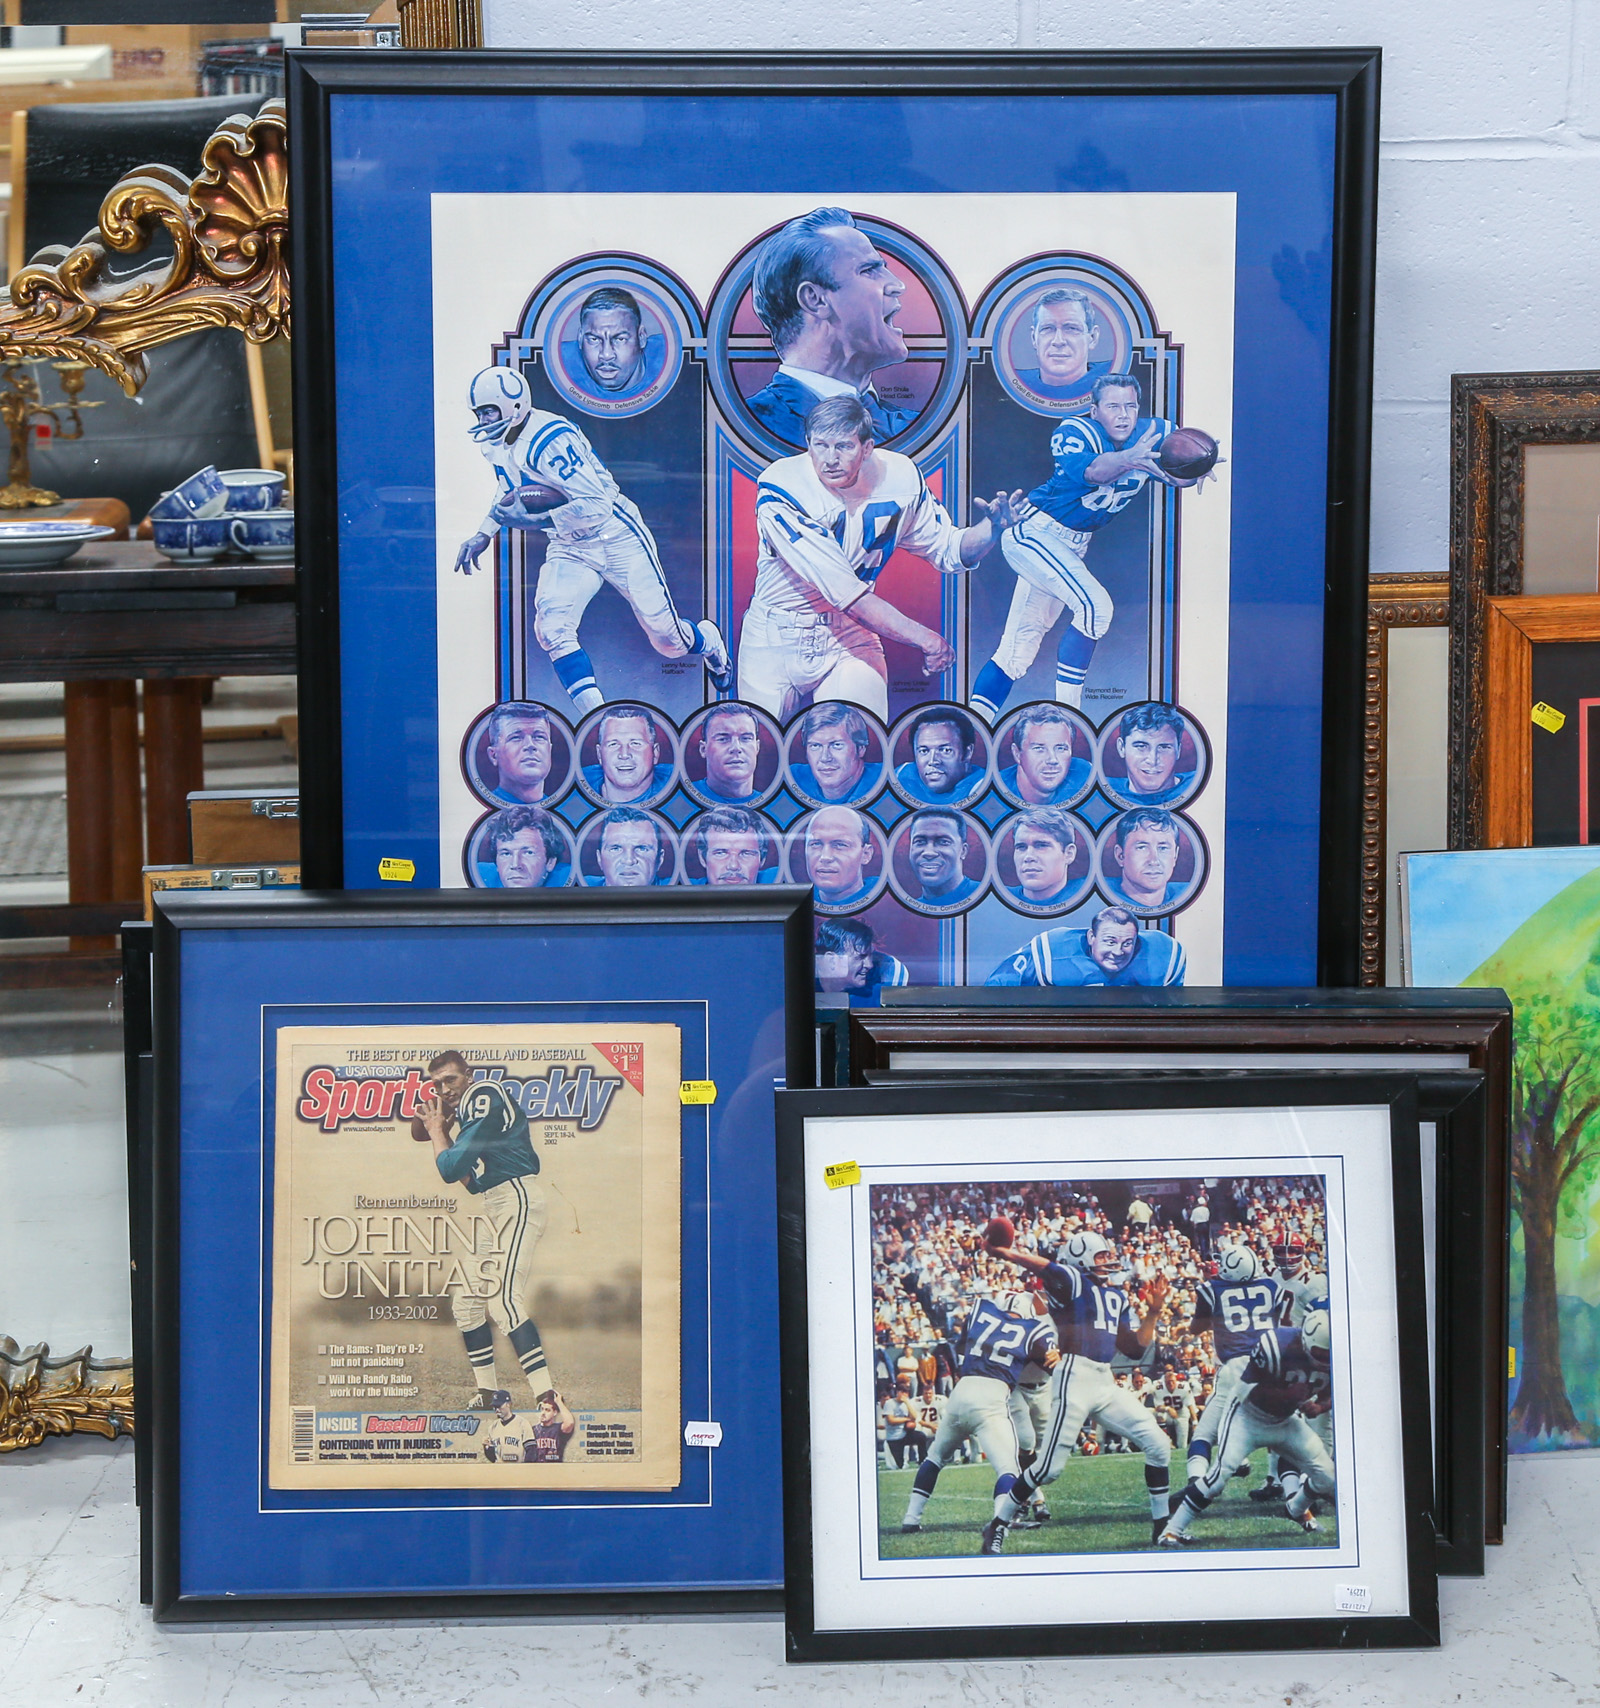 SELECTION OF FRAMED BALTIMORE COLTS 2ea3b0